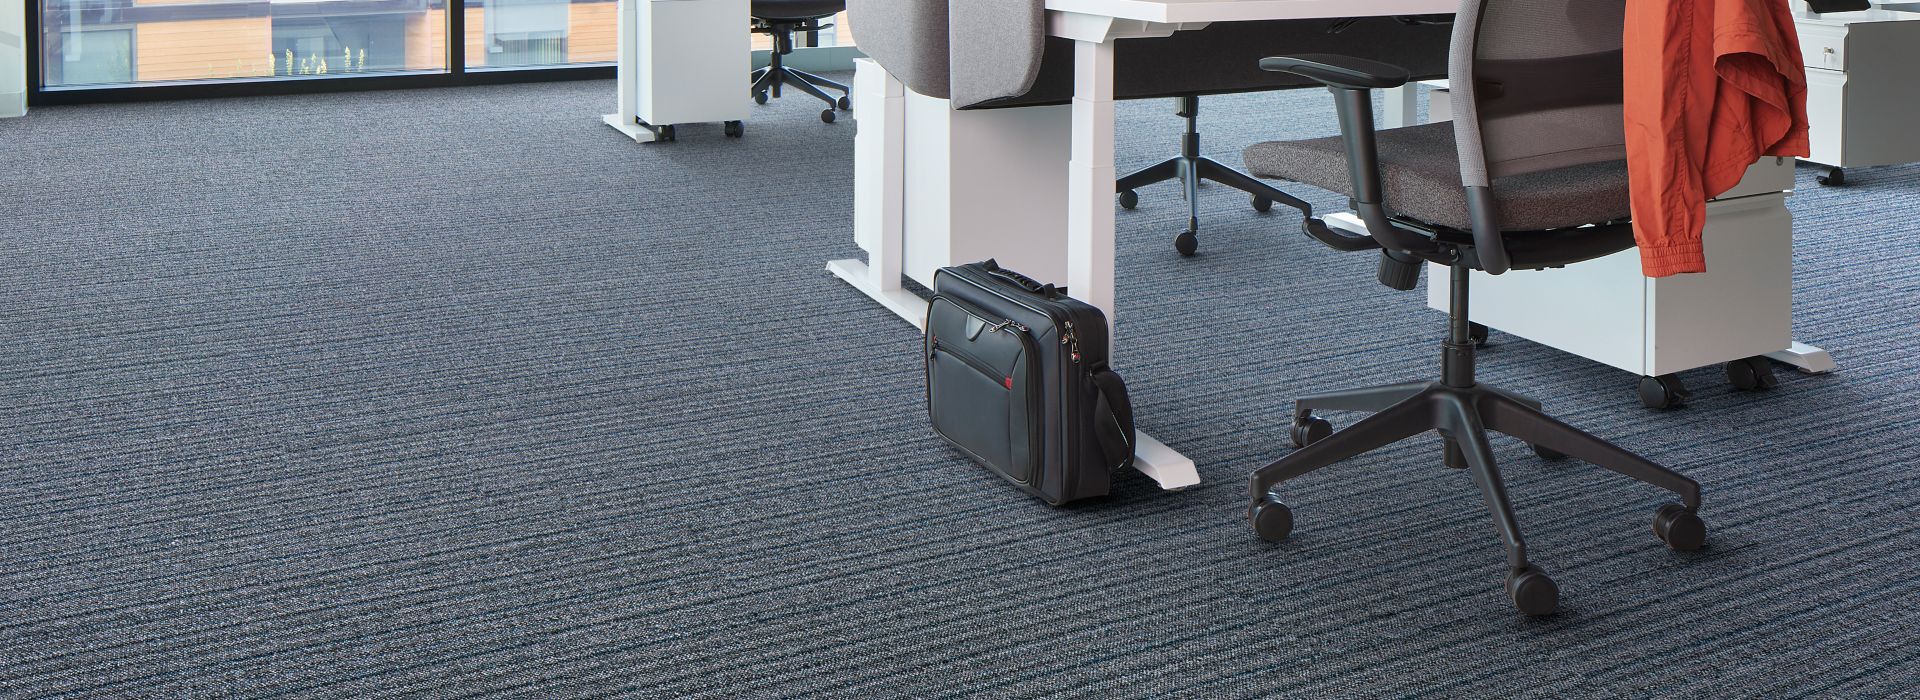 Interface WW865 carpet tile in office setting with desks and chairs